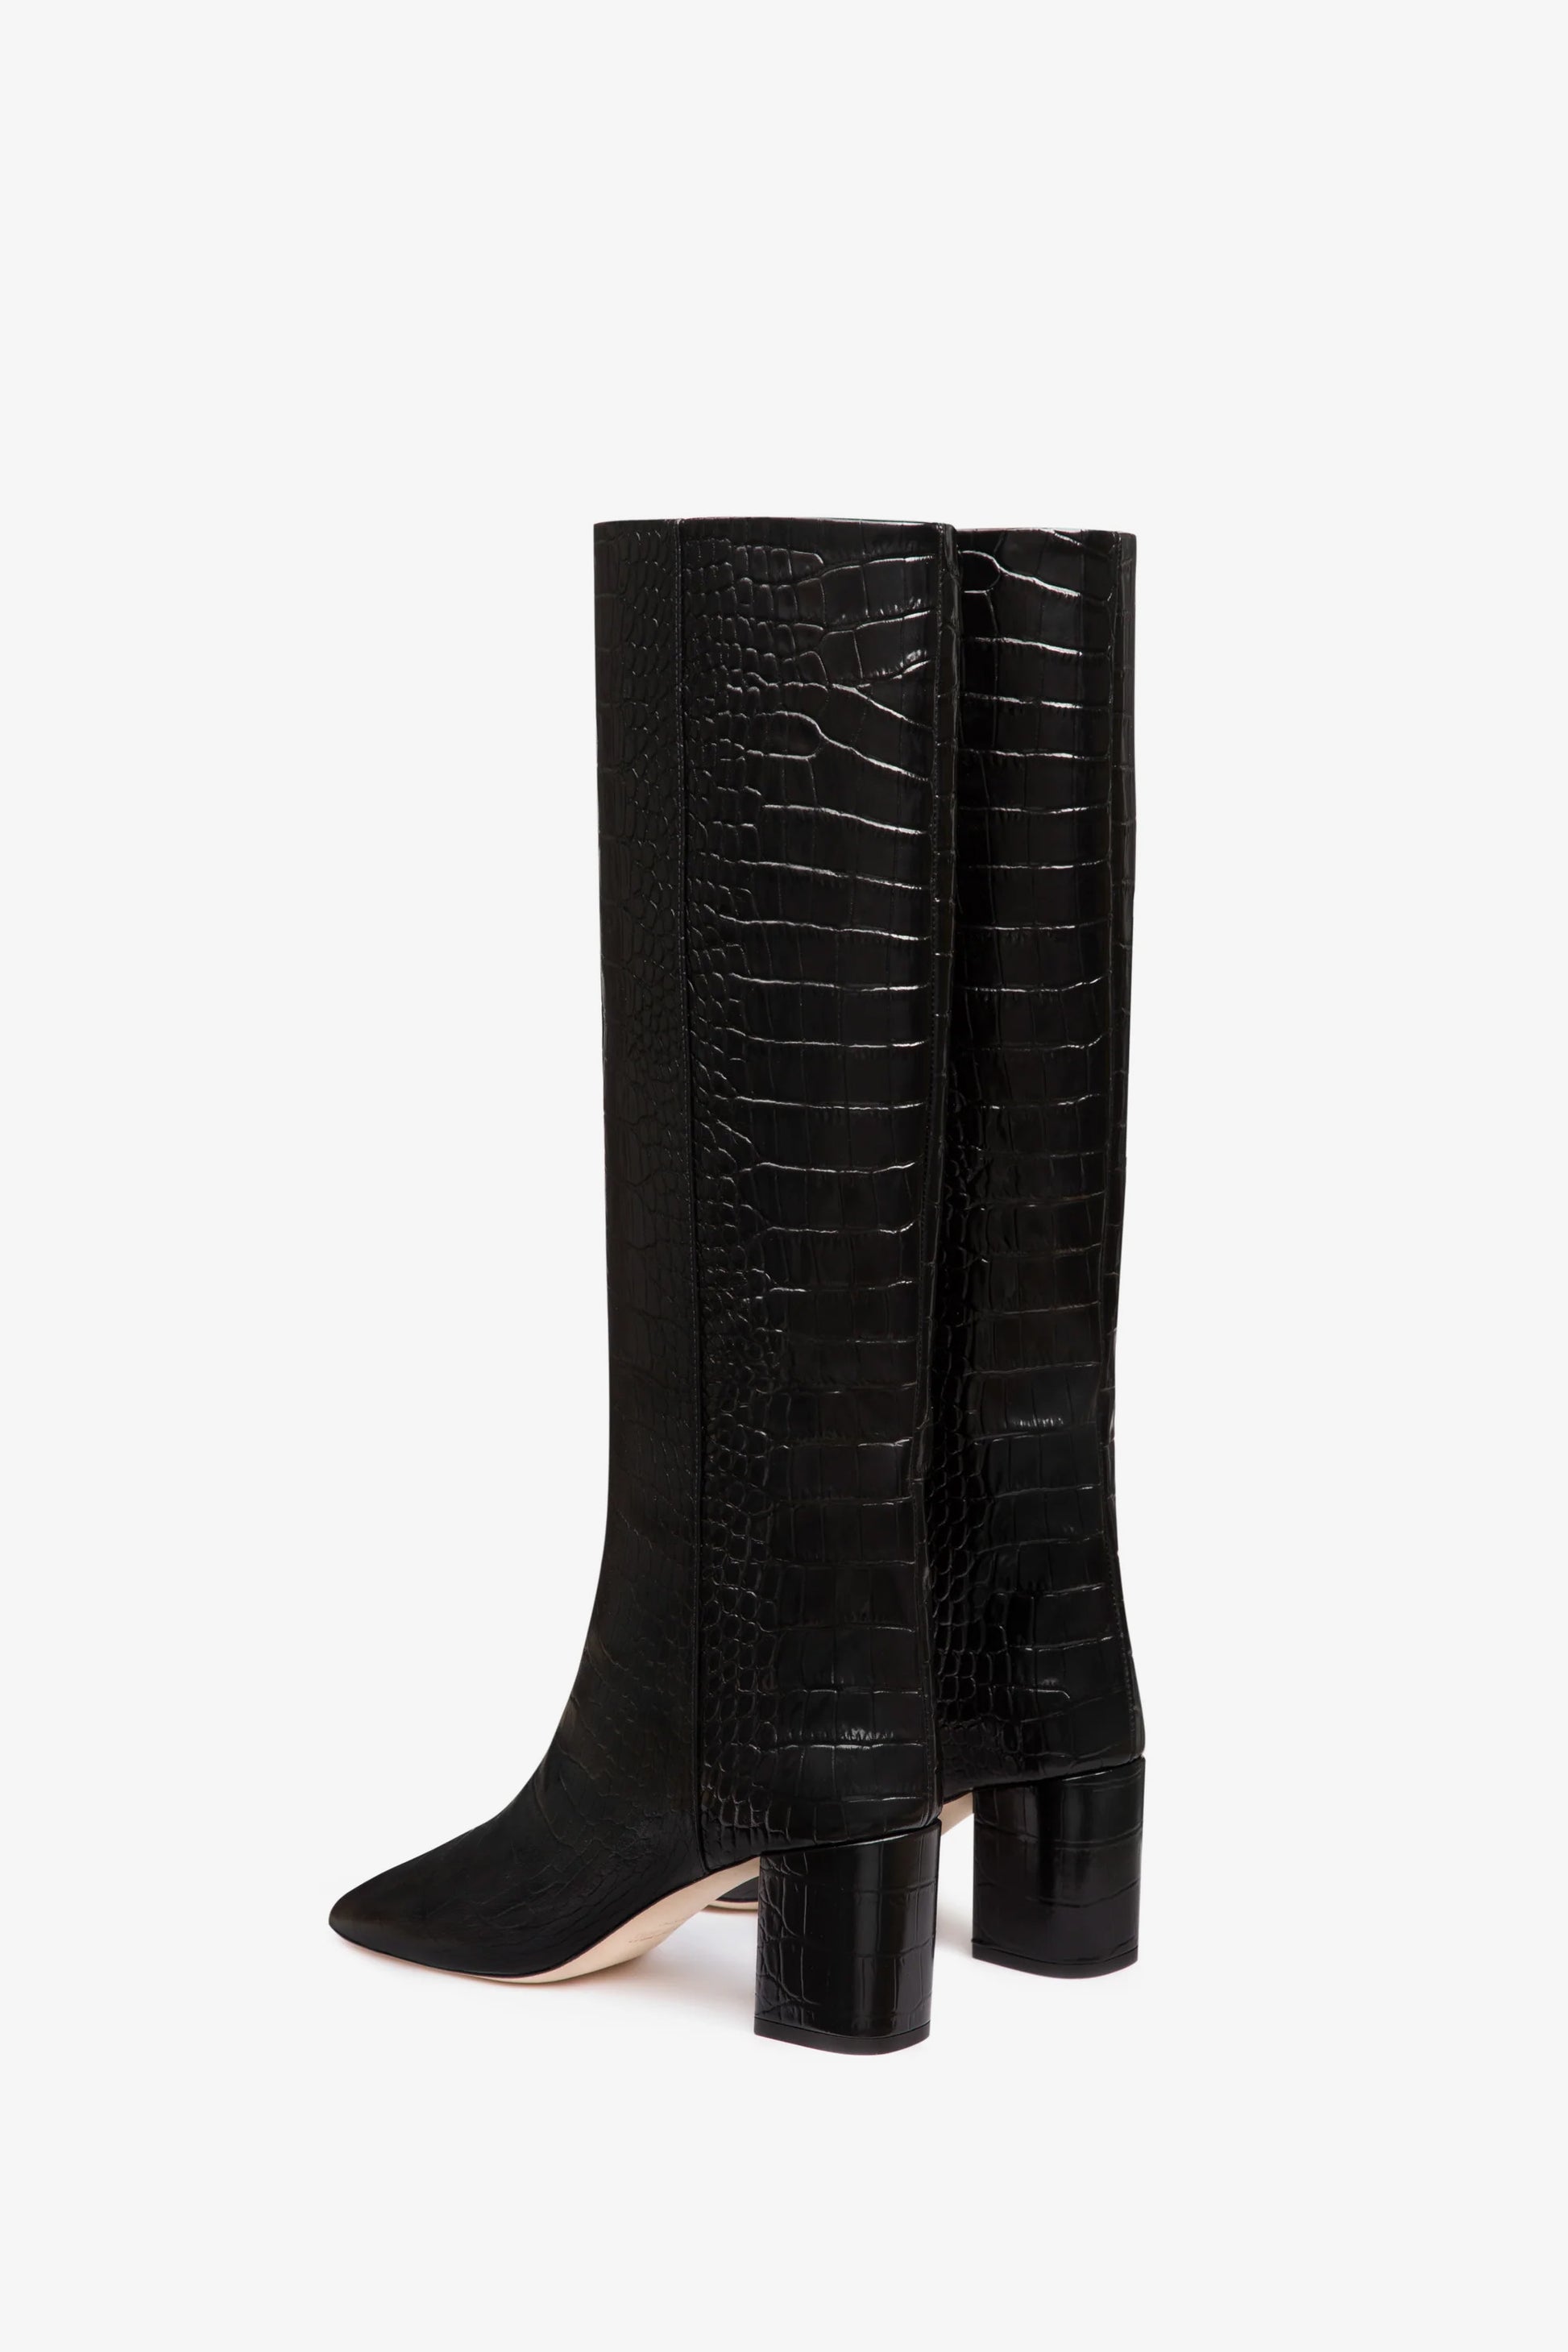 Carbon embossed leather boot - Back